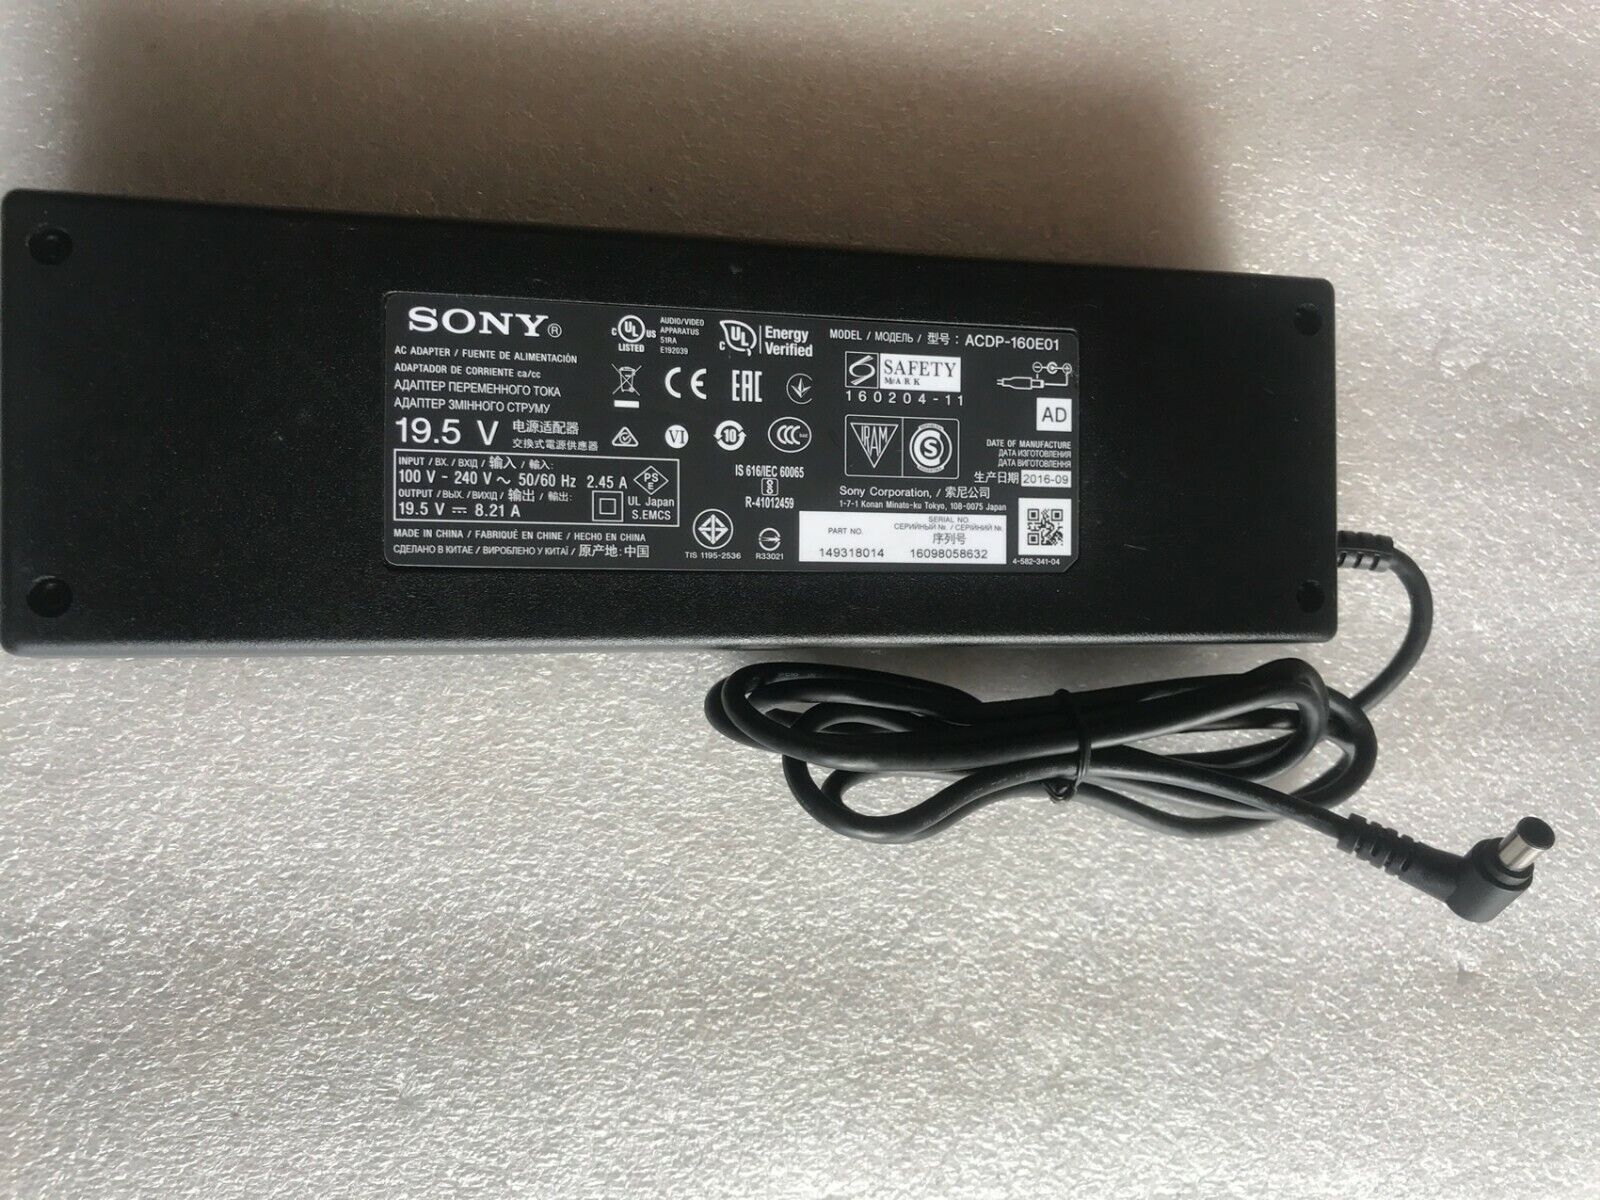 New Original Sony 19.5V AC/DC Adapter for Sony Bravia XBR-55X850D ACDP-160E01 TV Compatible Brand: For Sony Brand: - Click Image to Close